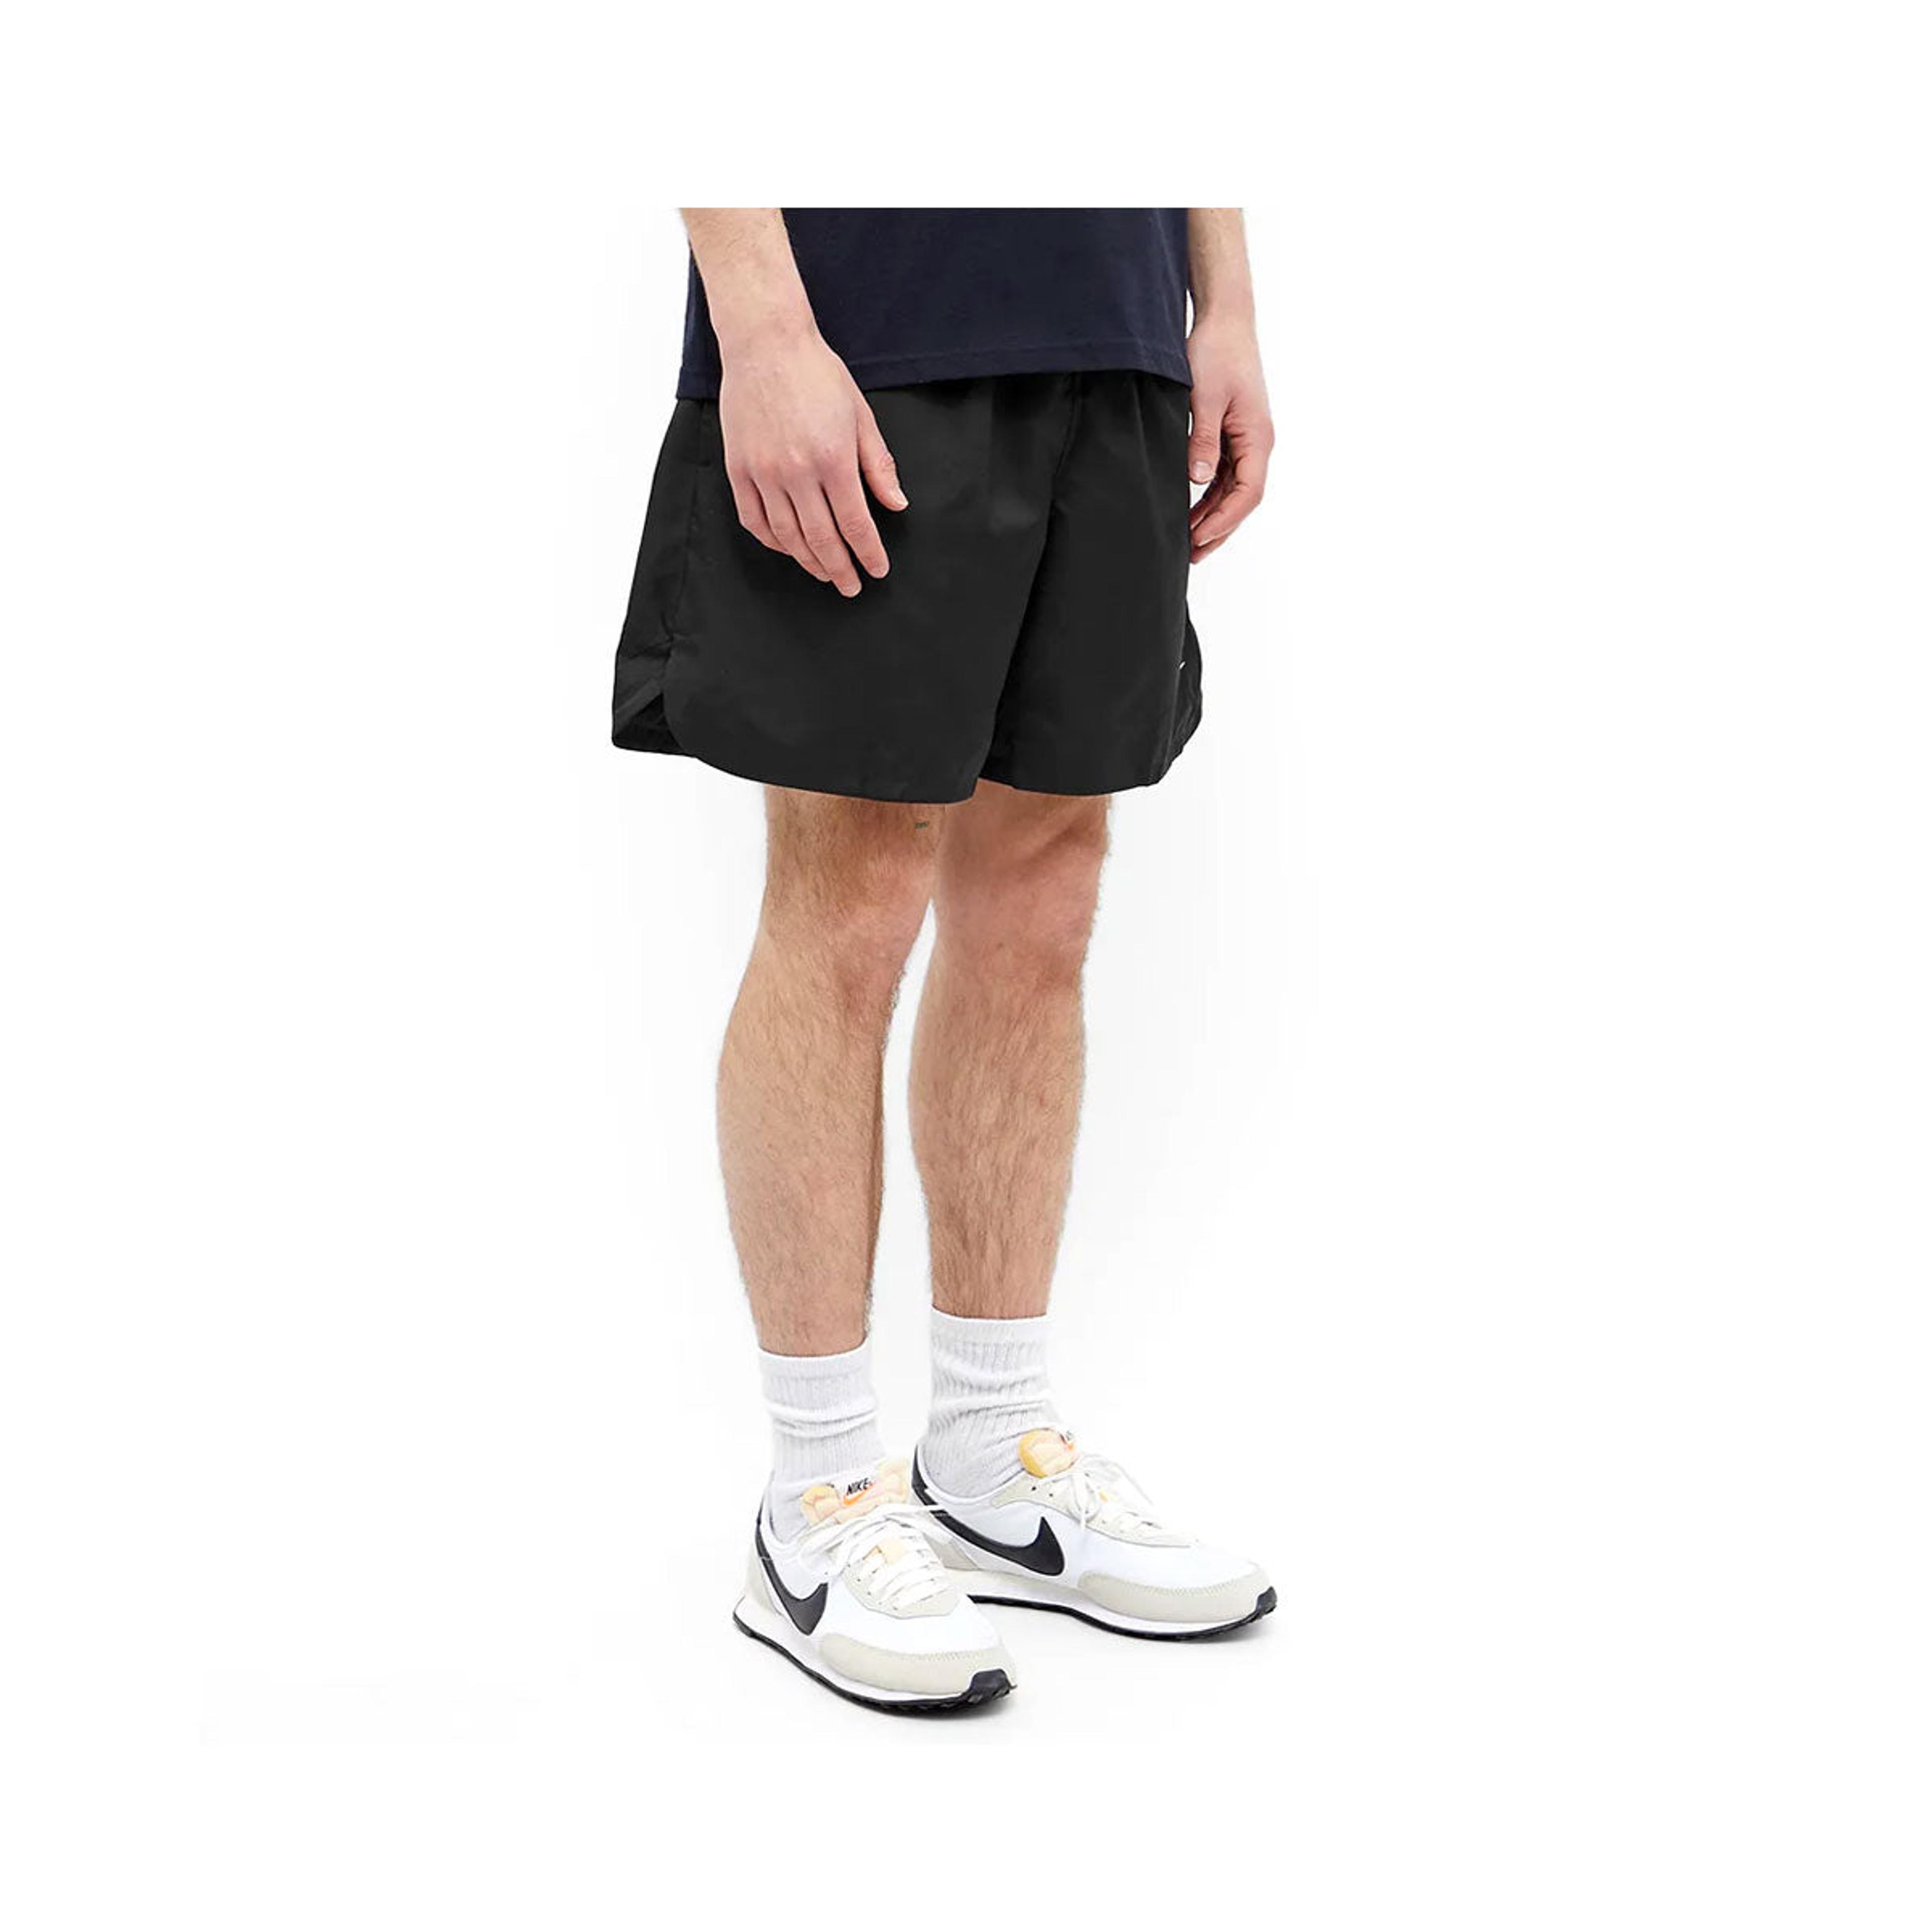 Alternate View 3 of Nike Men's Club Woven Lined Flow Short